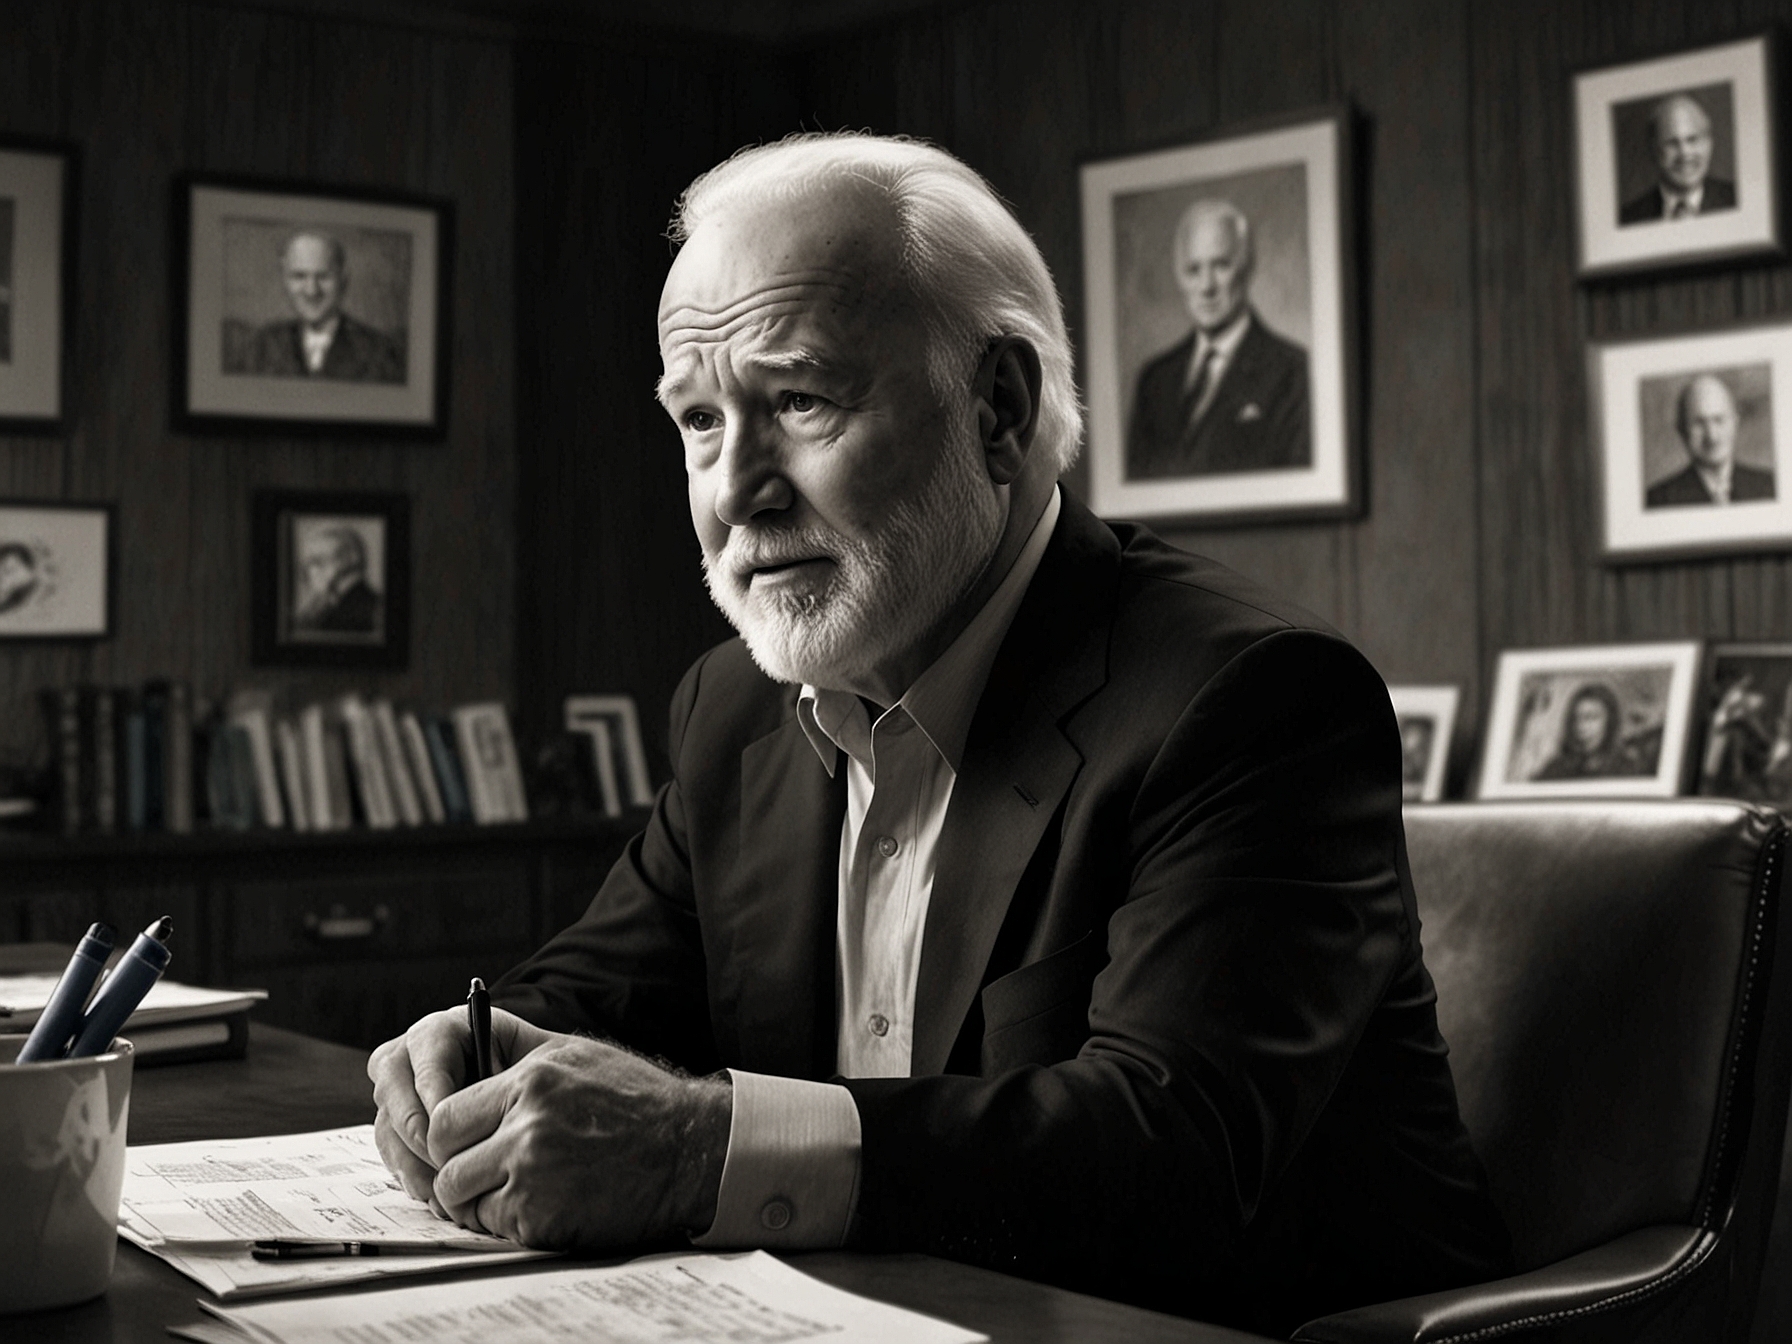 Director Rob Reiner critiquing Biden's performance on social media, highlighting missed opportunities to counter Trump's assertions and the debate's broader symbolic impact.